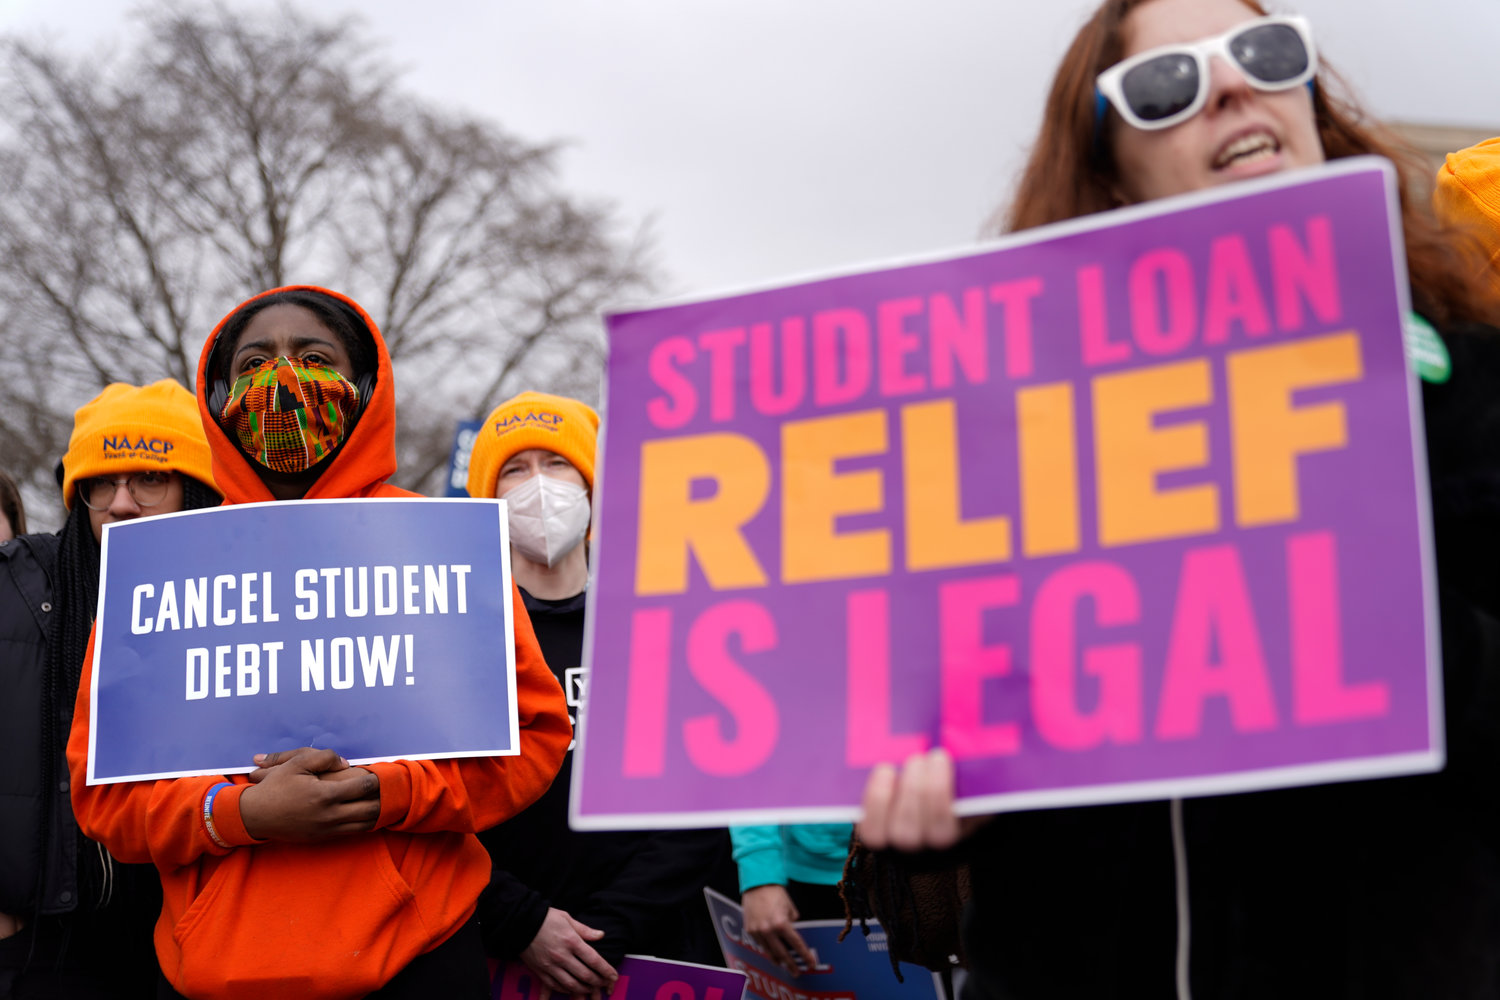 Student debt relief advocates gather outside the Supreme Court on Capitol Hill in Washington, Tuesday, Feb. 28, 2023, as the court hears arguments over President Joe Biden's student debt relief plan.